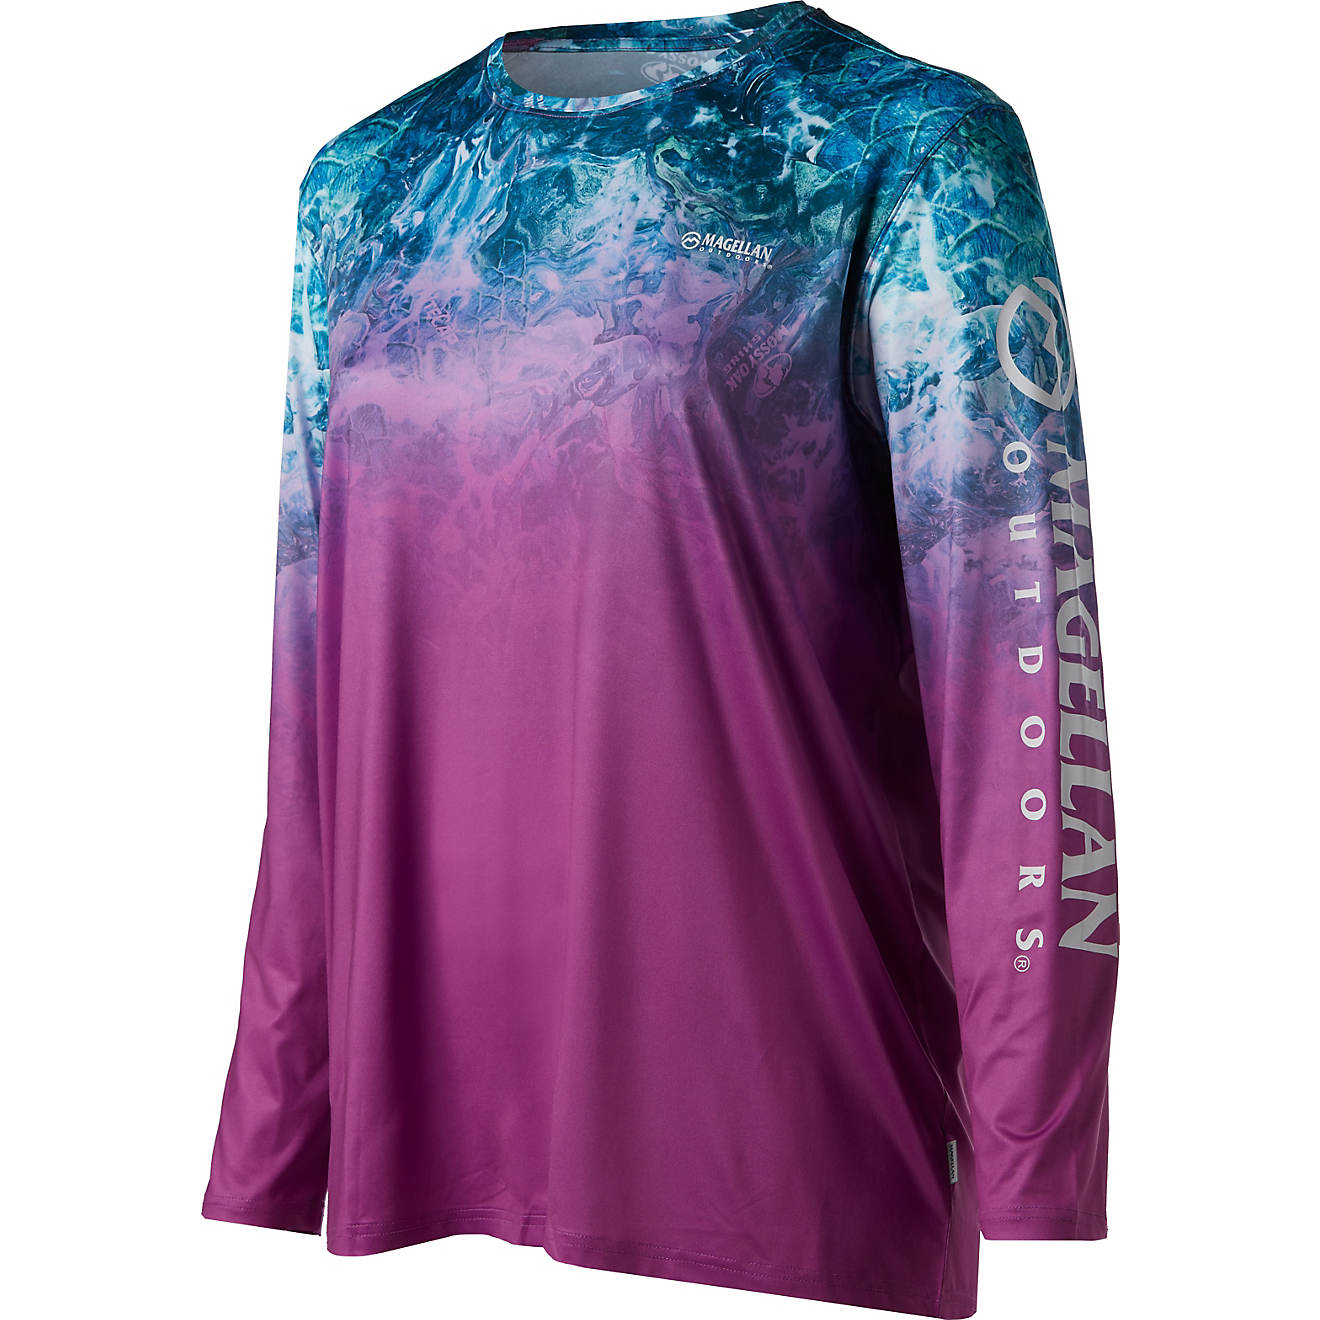 Magellan Outdoors Women's Mossy Oak Whitecap Ombre Plus Size Long Sleeve Top                                                     - view number 1